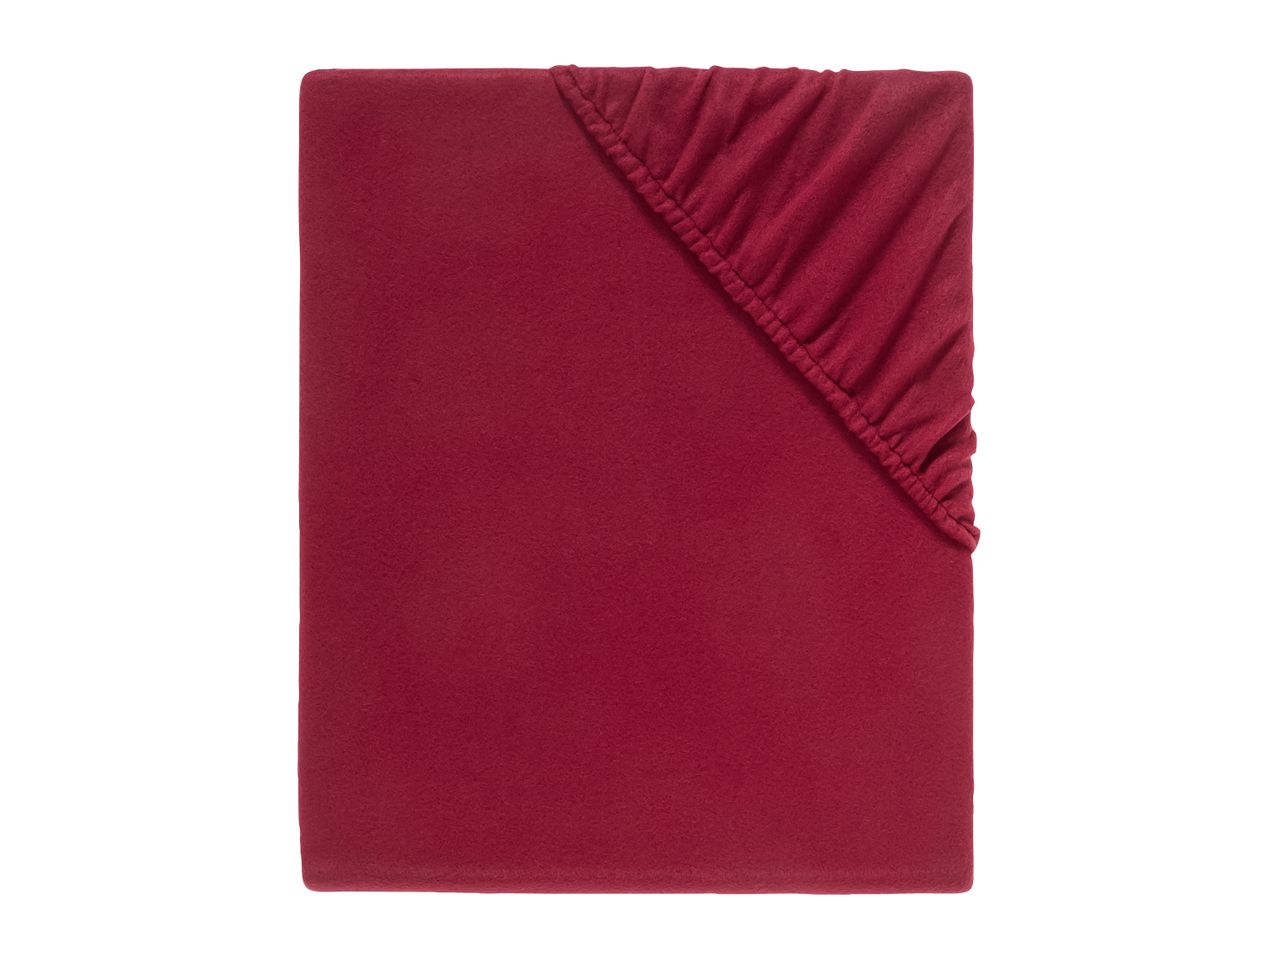 Go to full screen view: Livarno Home Fleece Fitted Sheet - Single - Image 1